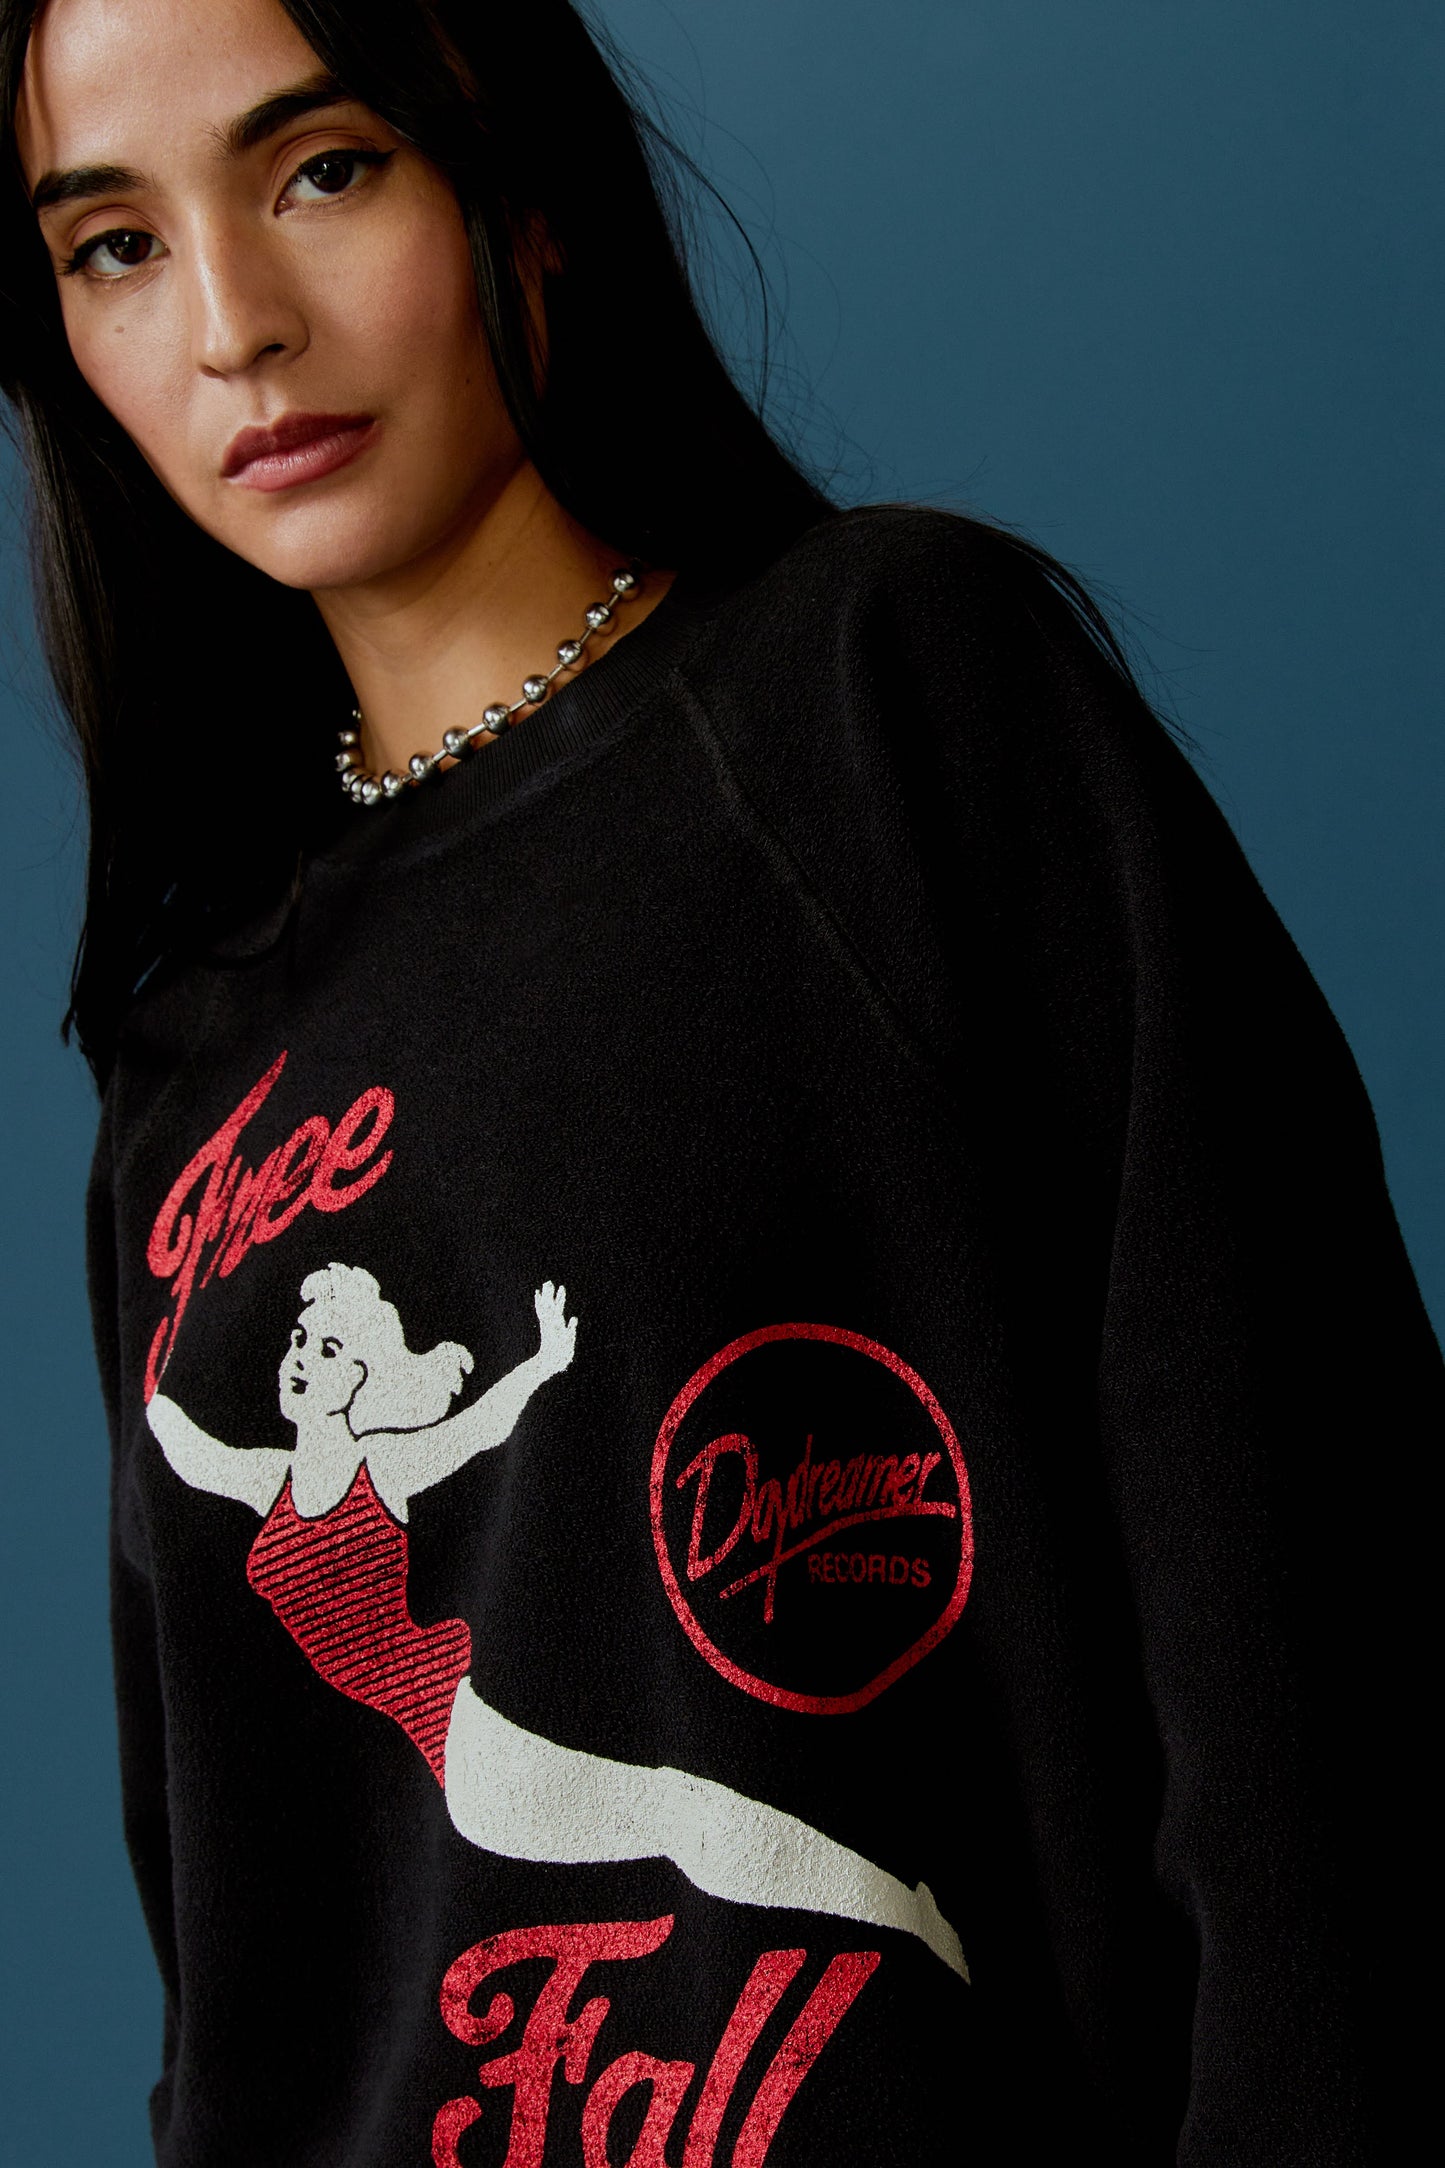 A dark-haired model featuring a black long sleeve stamped with 'Free Fall' in red font and a graphic of a falling girl in a red one-piece.